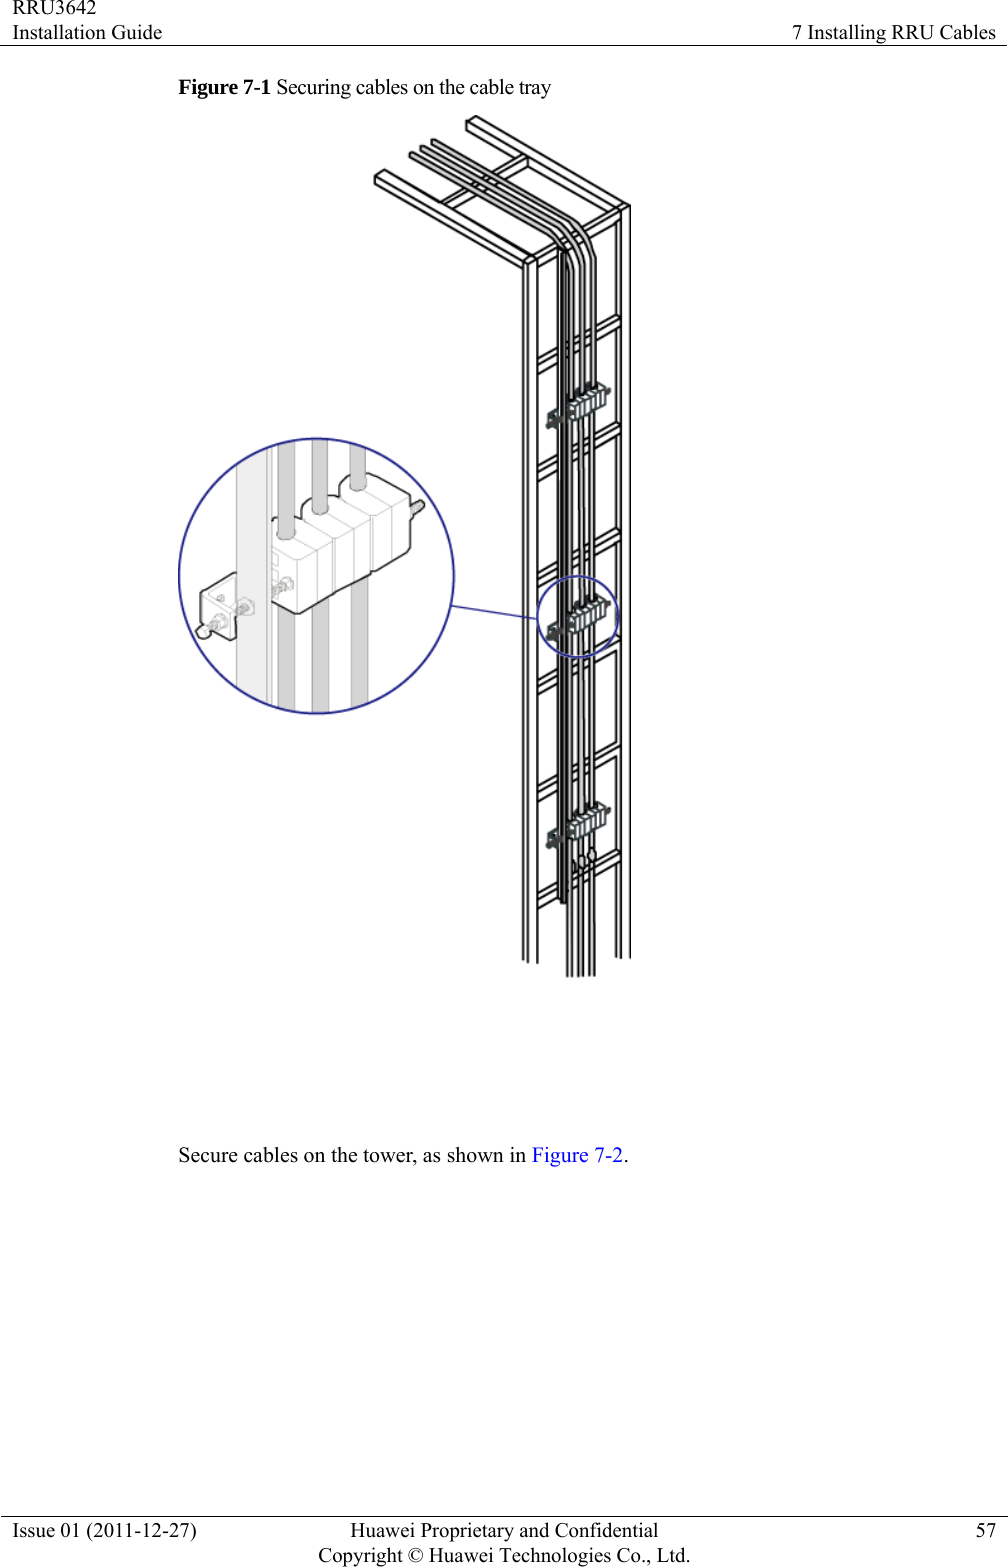 RRU3642 Installation Guide  7 Installing RRU Cables Issue 01 (2011-12-27)  Huawei Proprietary and Confidential         Copyright © Huawei Technologies Co., Ltd.57 Figure 7-1 Securing cables on the cable tray   Secure cables on the tower, as shown in Figure 7-2. 